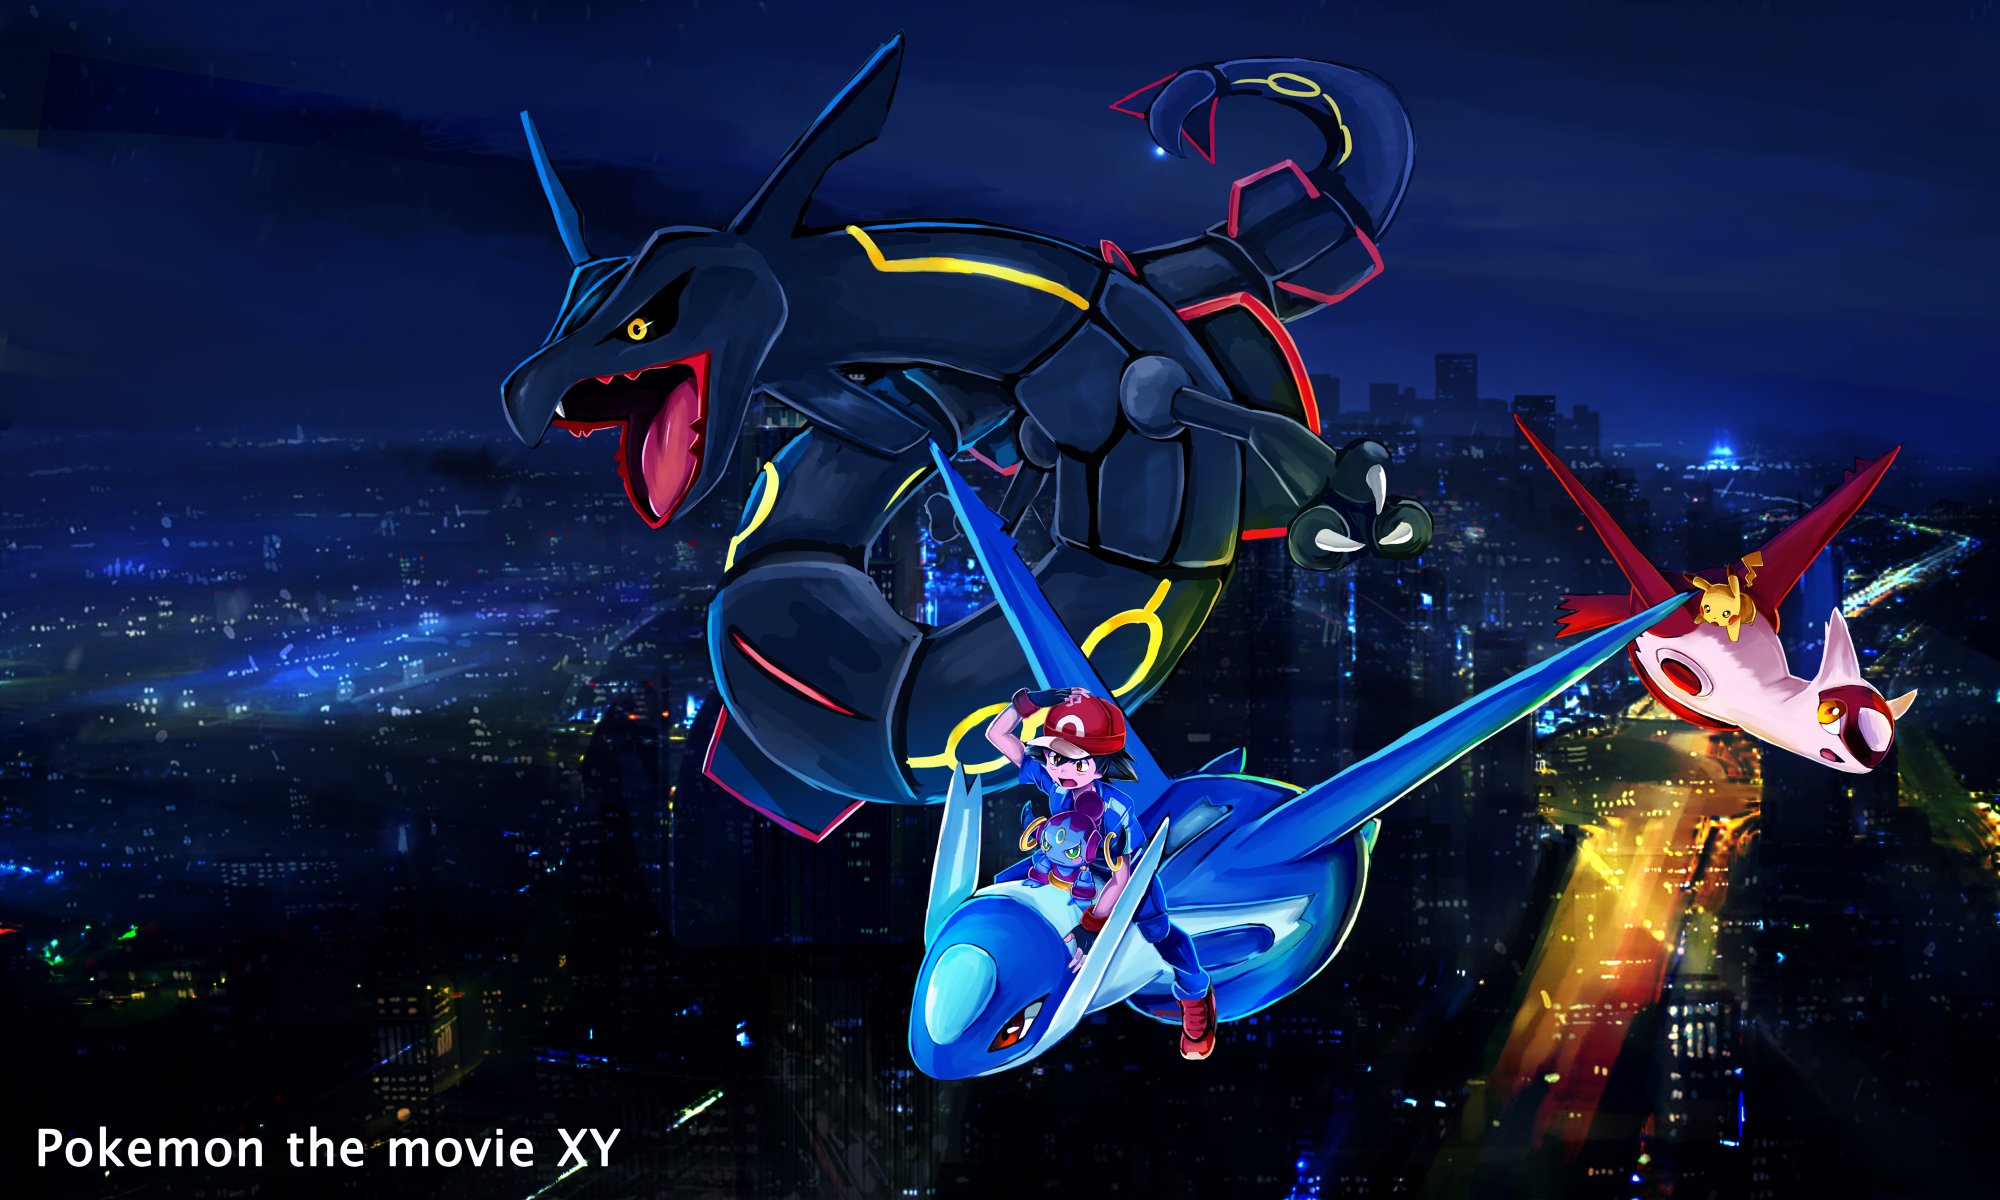 Free Download Rayquaza Wallpapers 4k Ultra Hd Rayquaza Wallpapers 00x10 For Your Desktop Mobile Tablet Explore 75 Rayquaza Wallpapers Pokemon Wallpaper Rayquaza Kyogre Wallpaper Shiny Pokemon Wallpaper